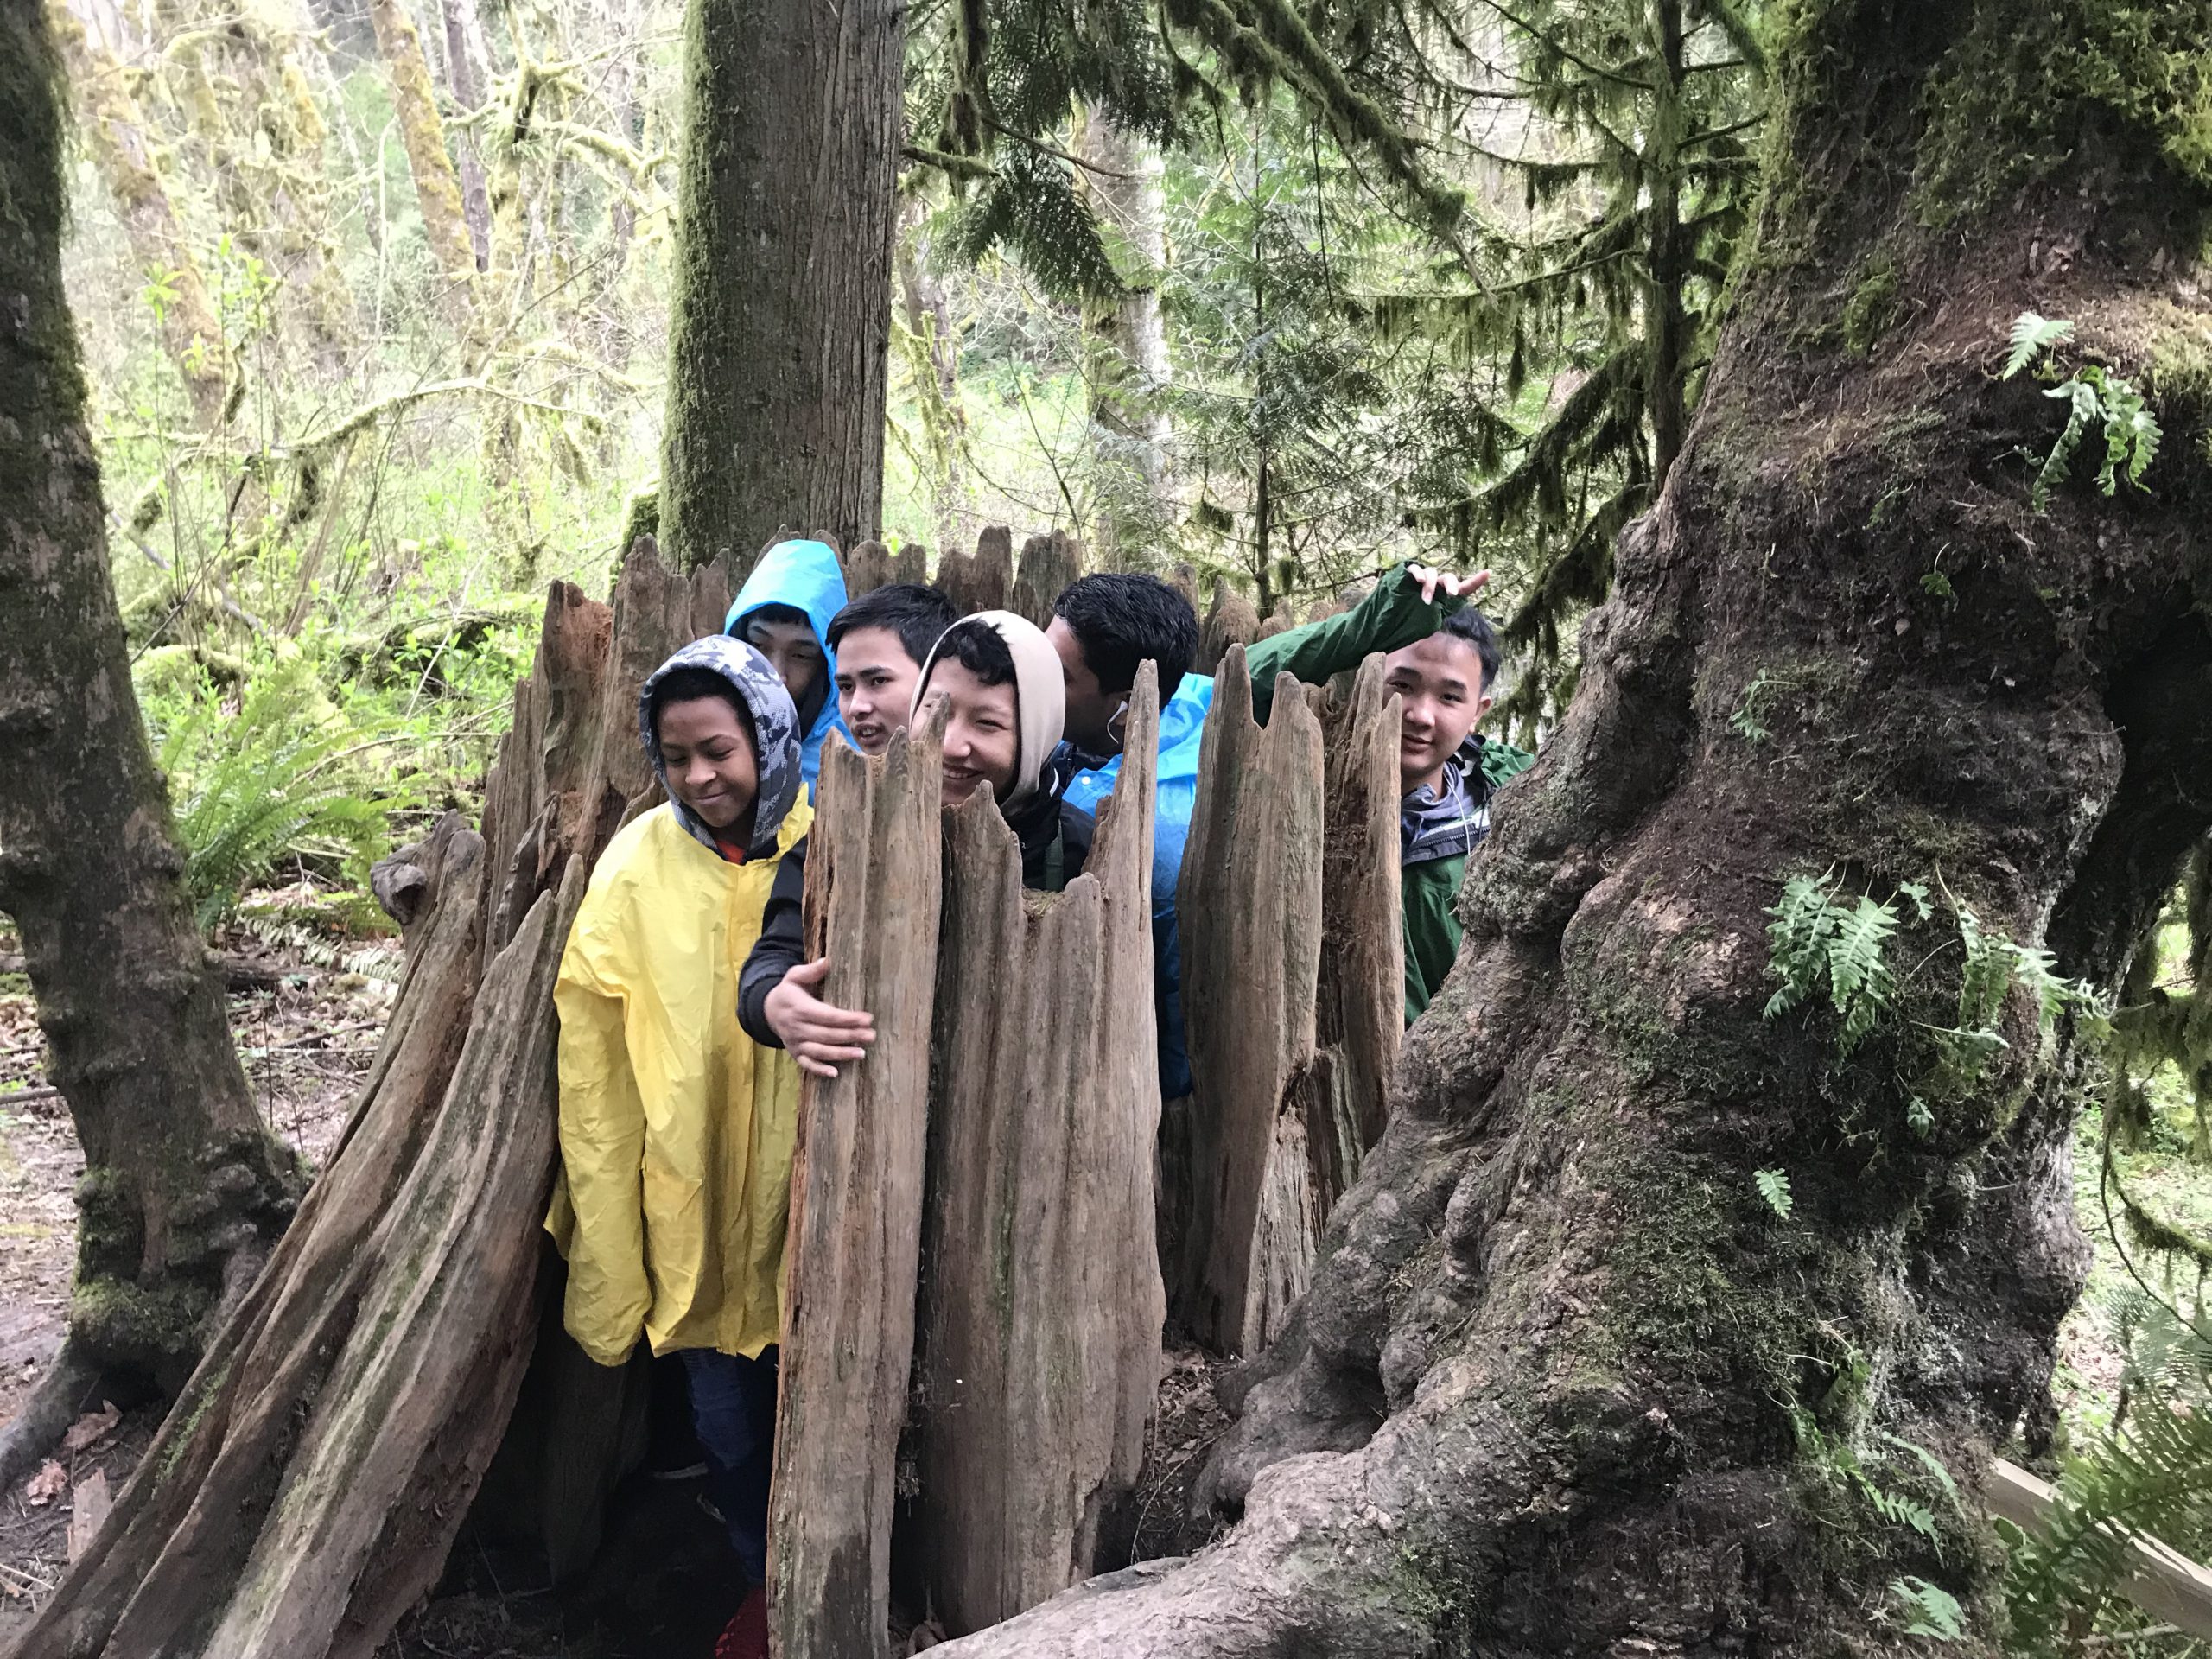 Kids standing inside a decayed tree stump in the forest